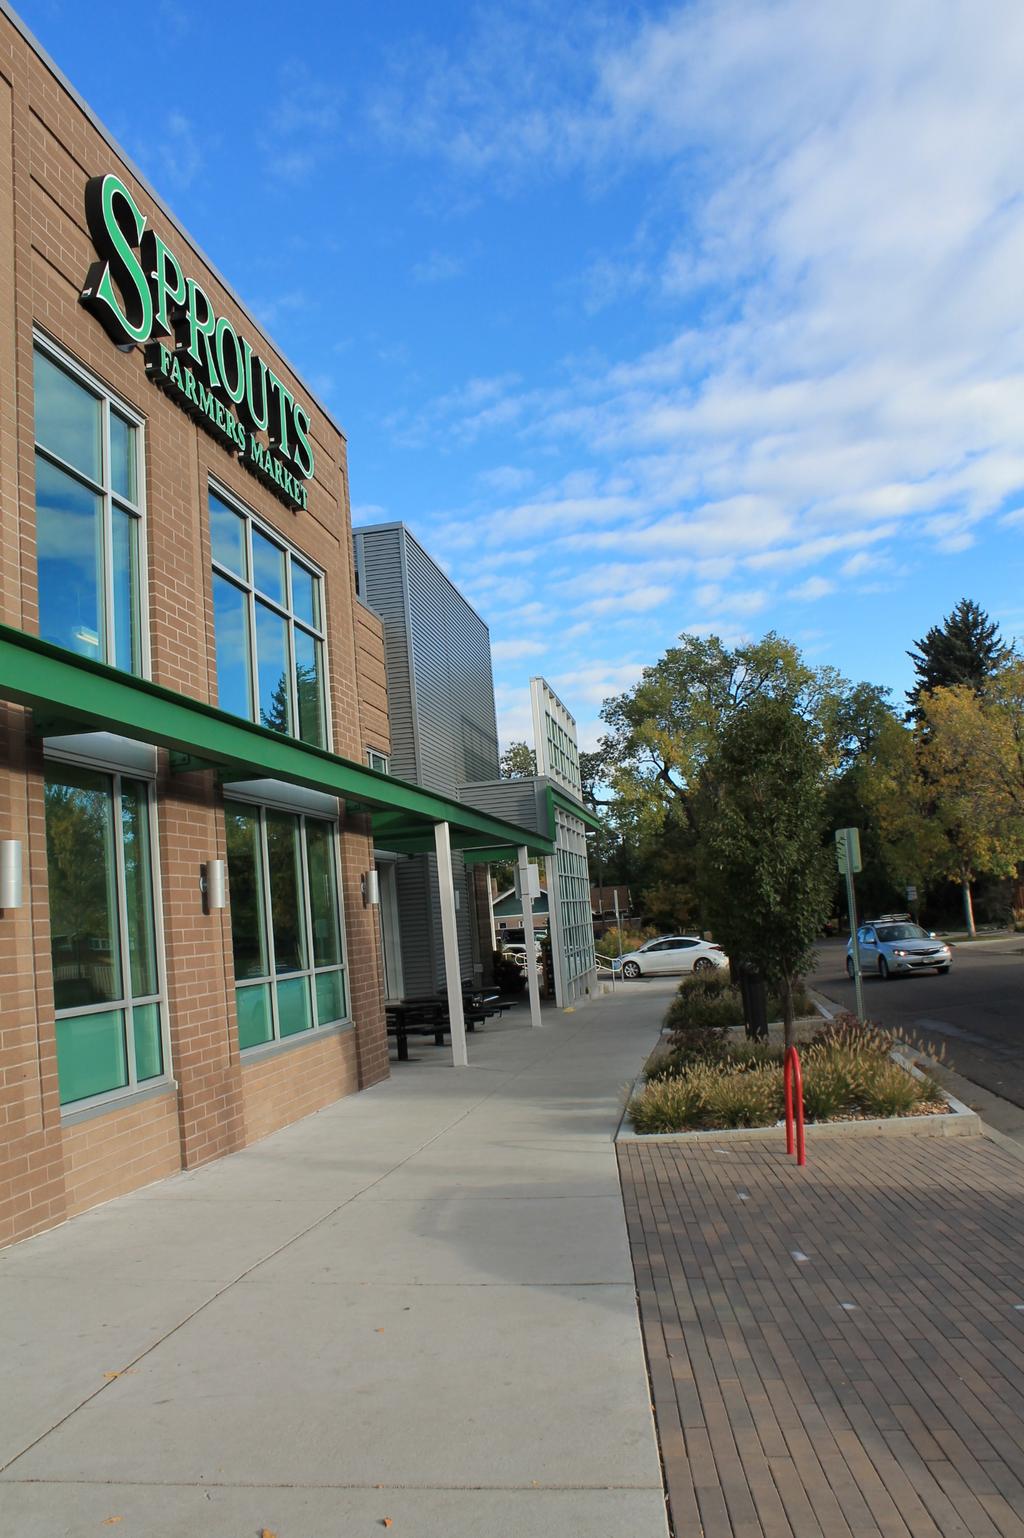 Economy Recommendations to Broaden Healthy Food Access: 1. Recruit/incentivize small- or mid-sized grocery in the lowaccess area (City Park West/North Cheesman along Colfax) 2.